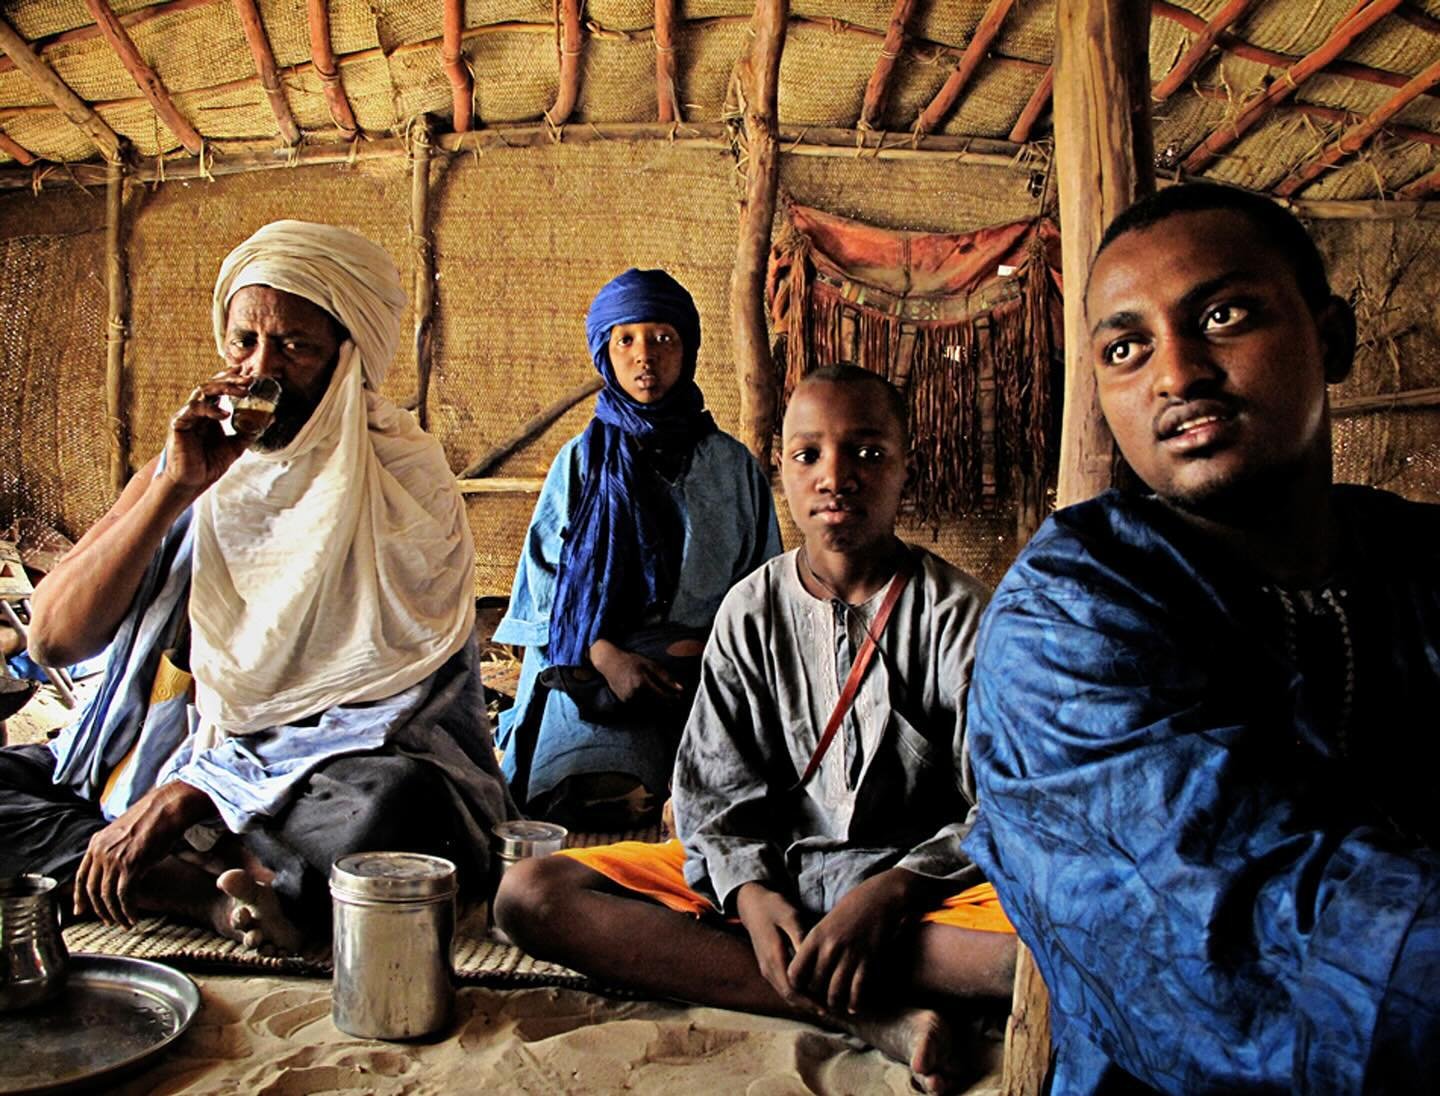 Throwback to pre-2012 Tombouctou, capital of the Tuareg in Mali: A glimpse of daily life with a Tuareg family camping and a butchery scene. #mali #Touareg #History #tombouctou #africa #photographyjourney #StreetPhotographyMagic #bodylanguage #streetp